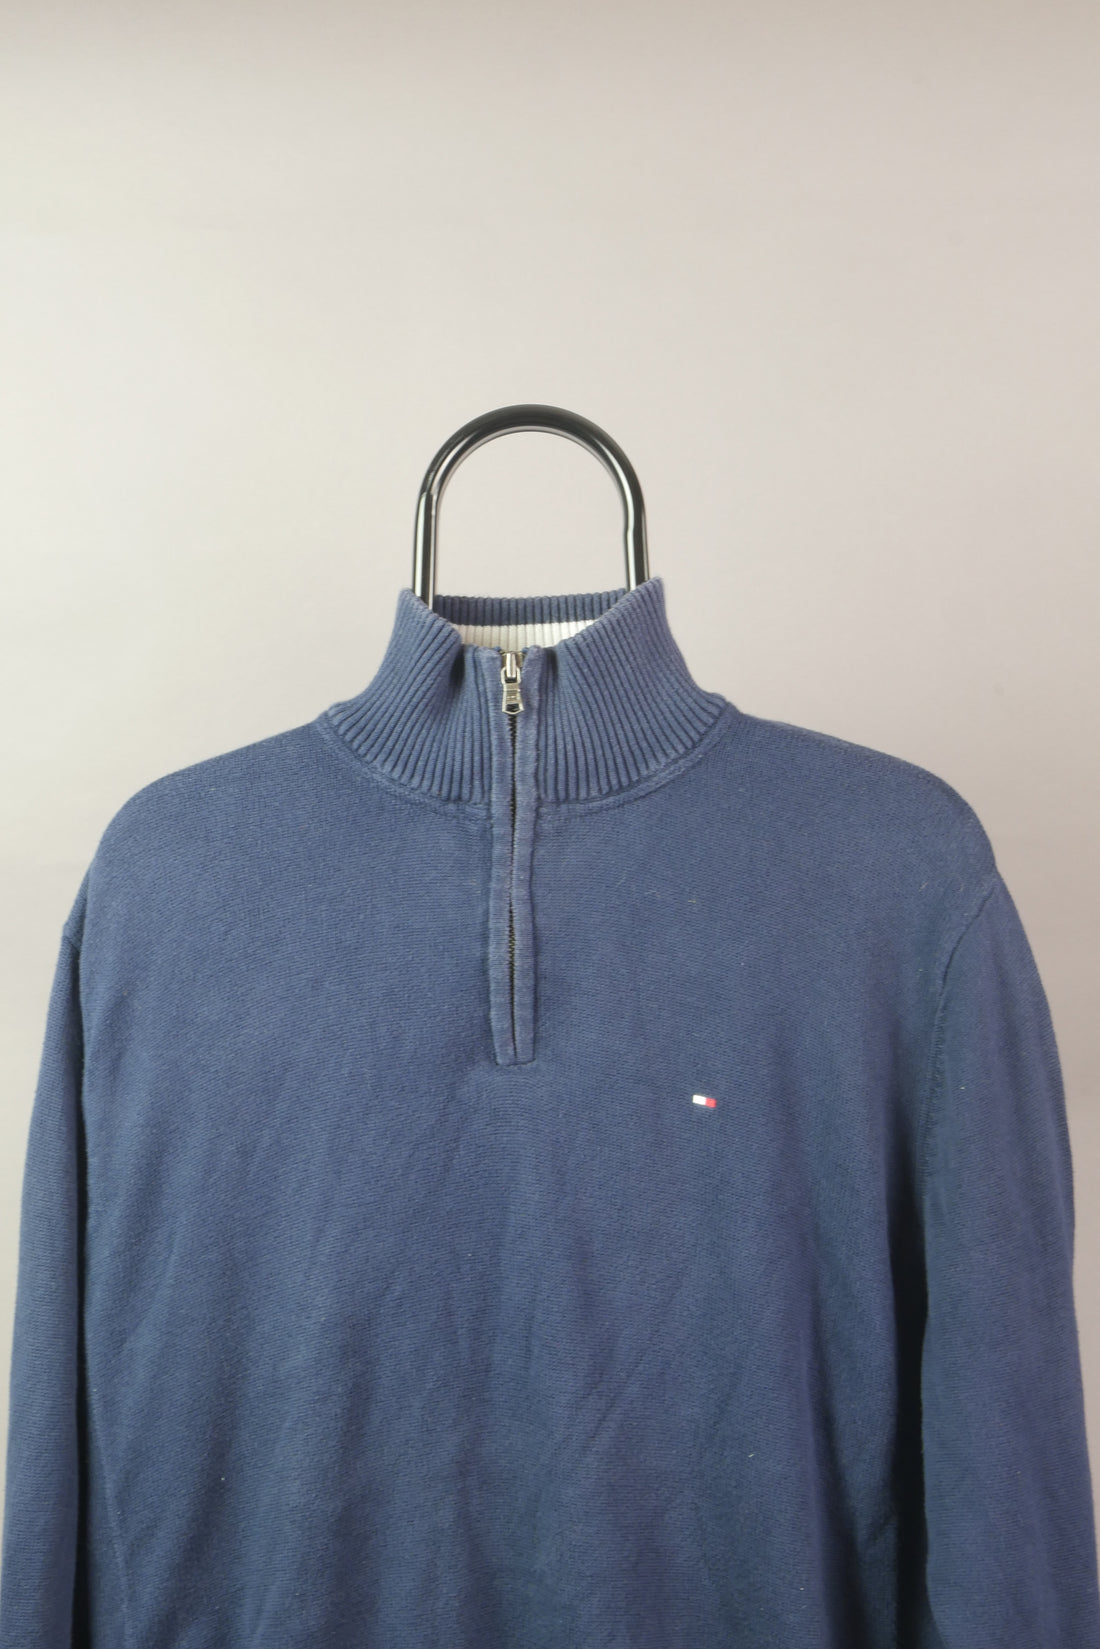 The Tommy Hilfiger 1/4 Sweater (L)